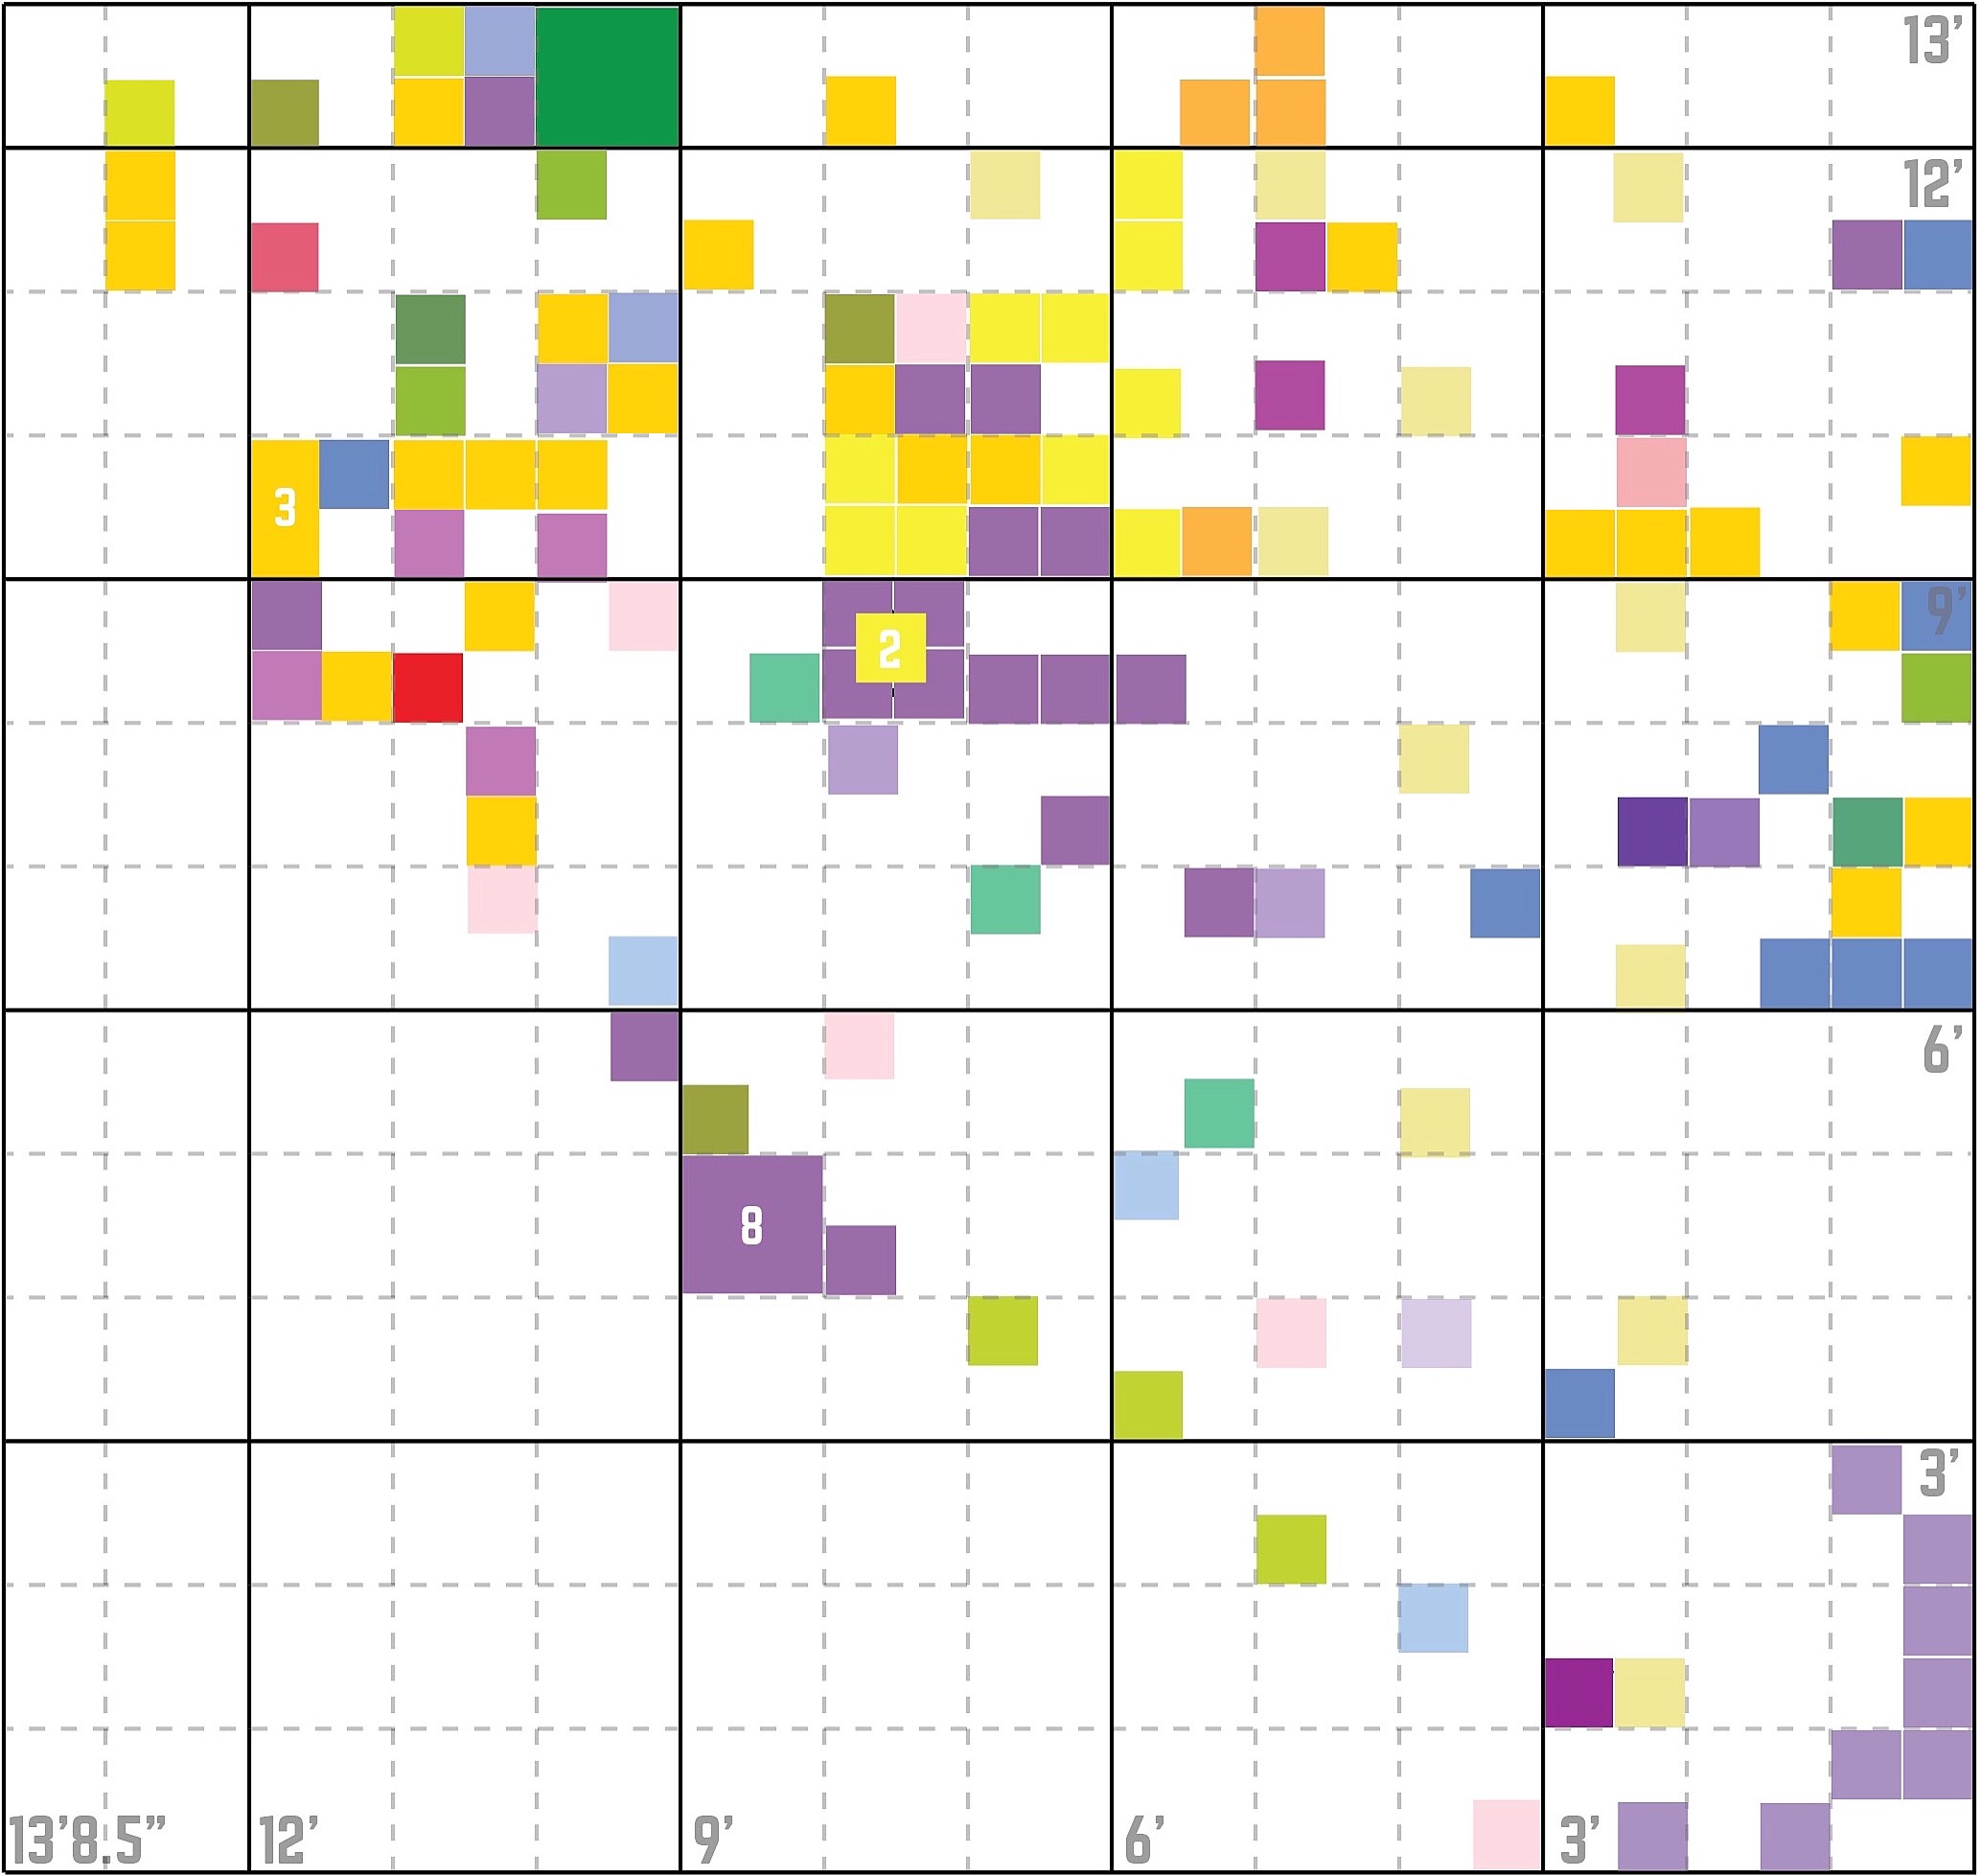 Grid diagram of geocoded plants growing within the Butterfly Redux landscape by John Kamp of Prairieform.